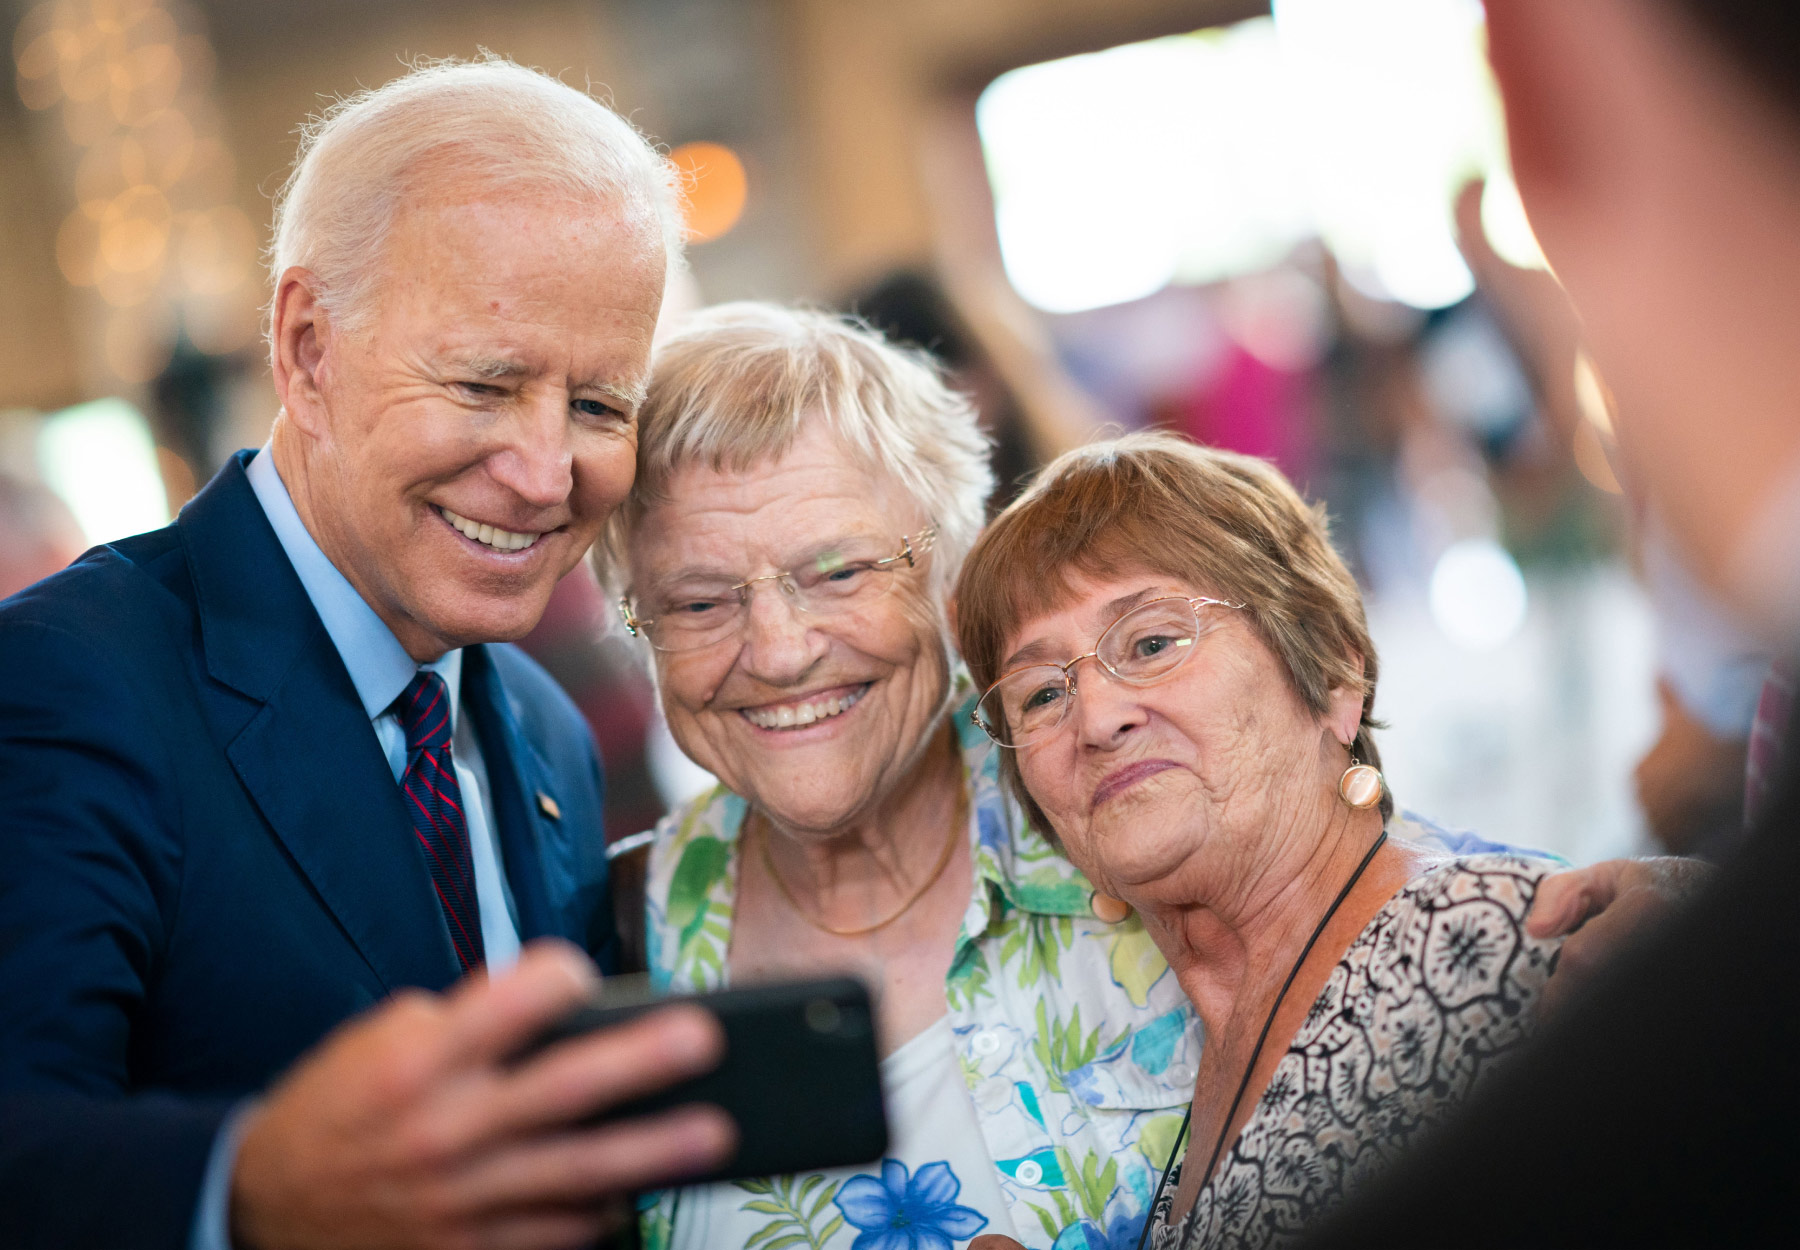 President Joe Biden takes a photo with attendees at an event in Burlington, IA